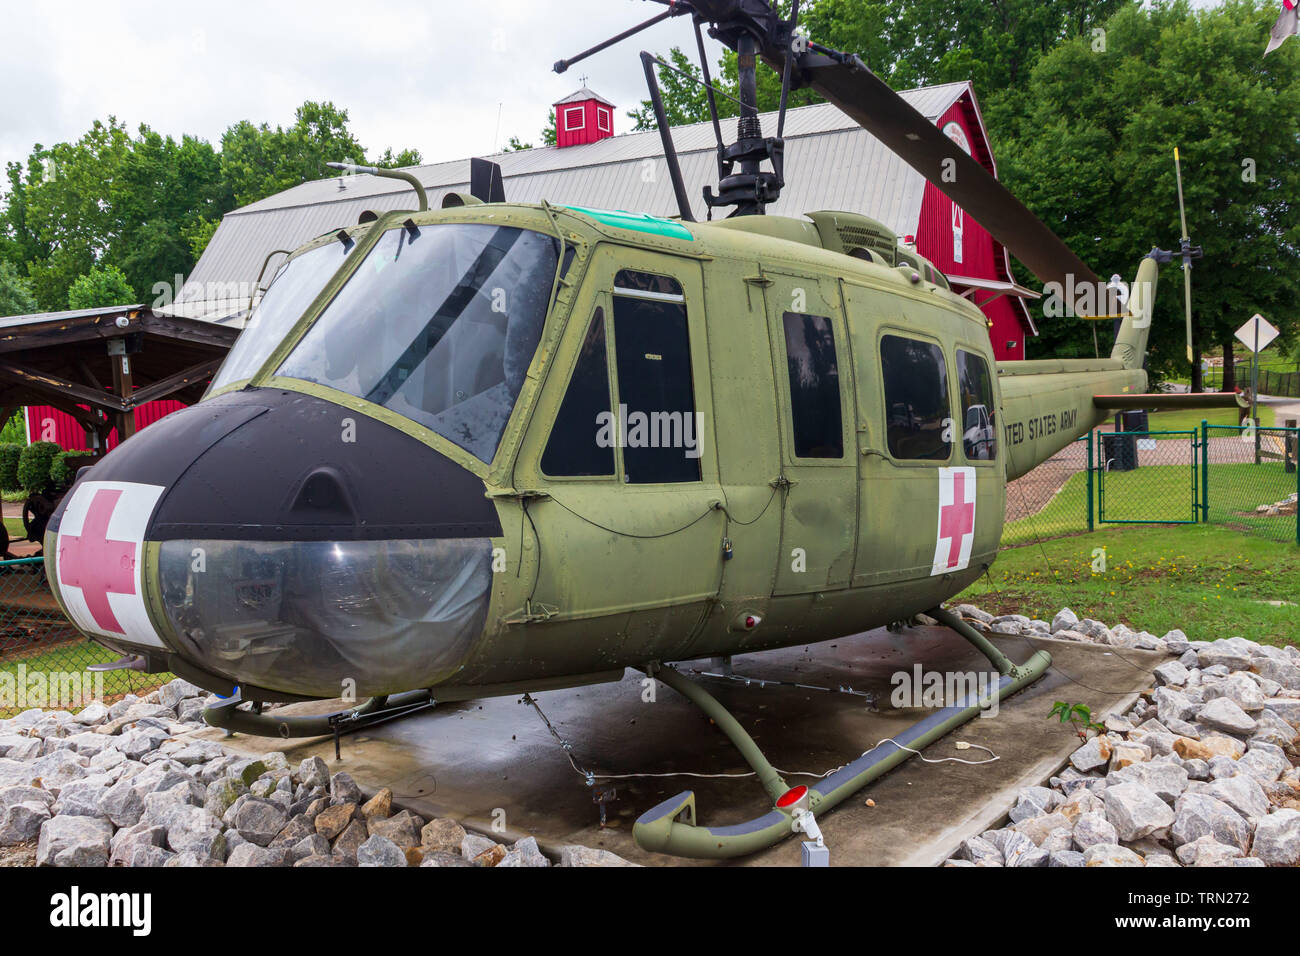 McDonough, Georgia / USA - June 9, 2019: A Huey UH-1F model 205 helicopter on display outside of the Veteran's Museum in Heritage Village at Heritage Stock Photo